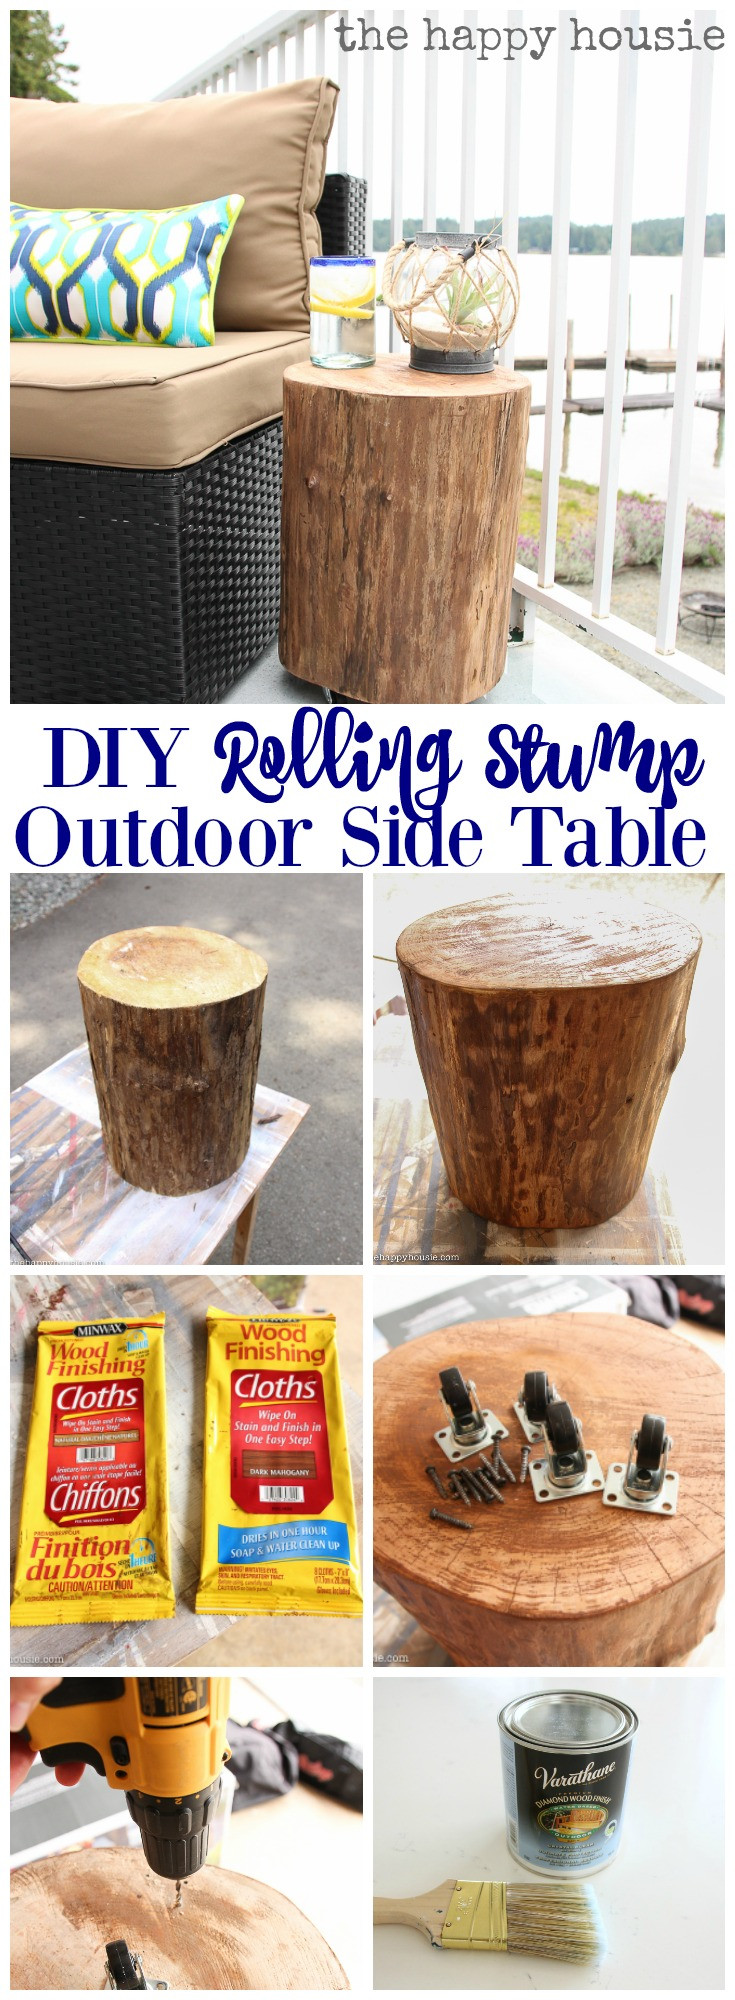 DIY Outdoor Side Tables
 DIY Outdoor Rolling Stump Side Table